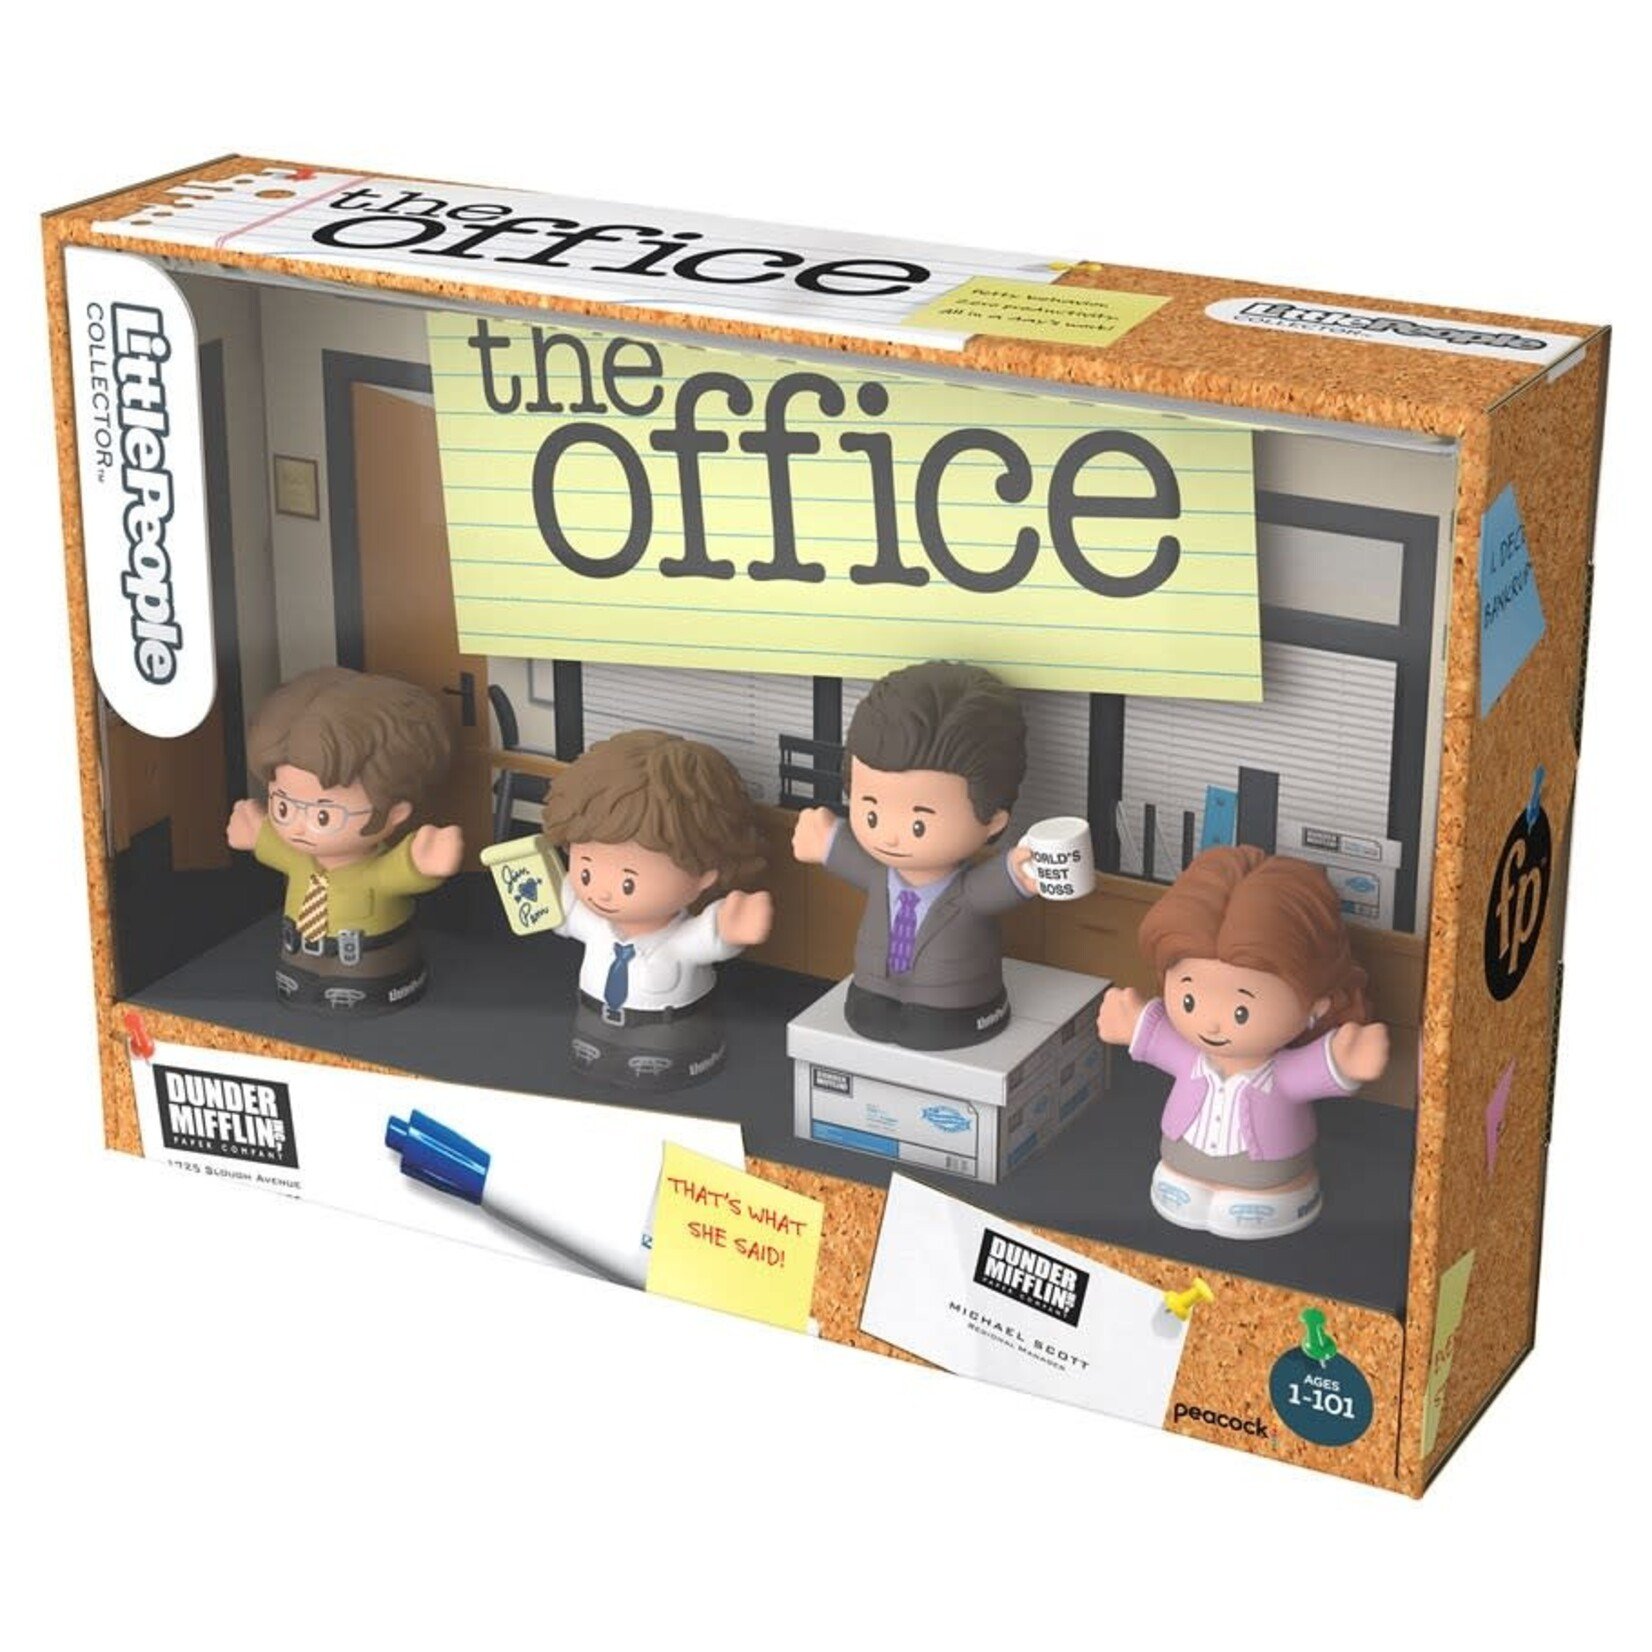 The Office Little People Collector Set